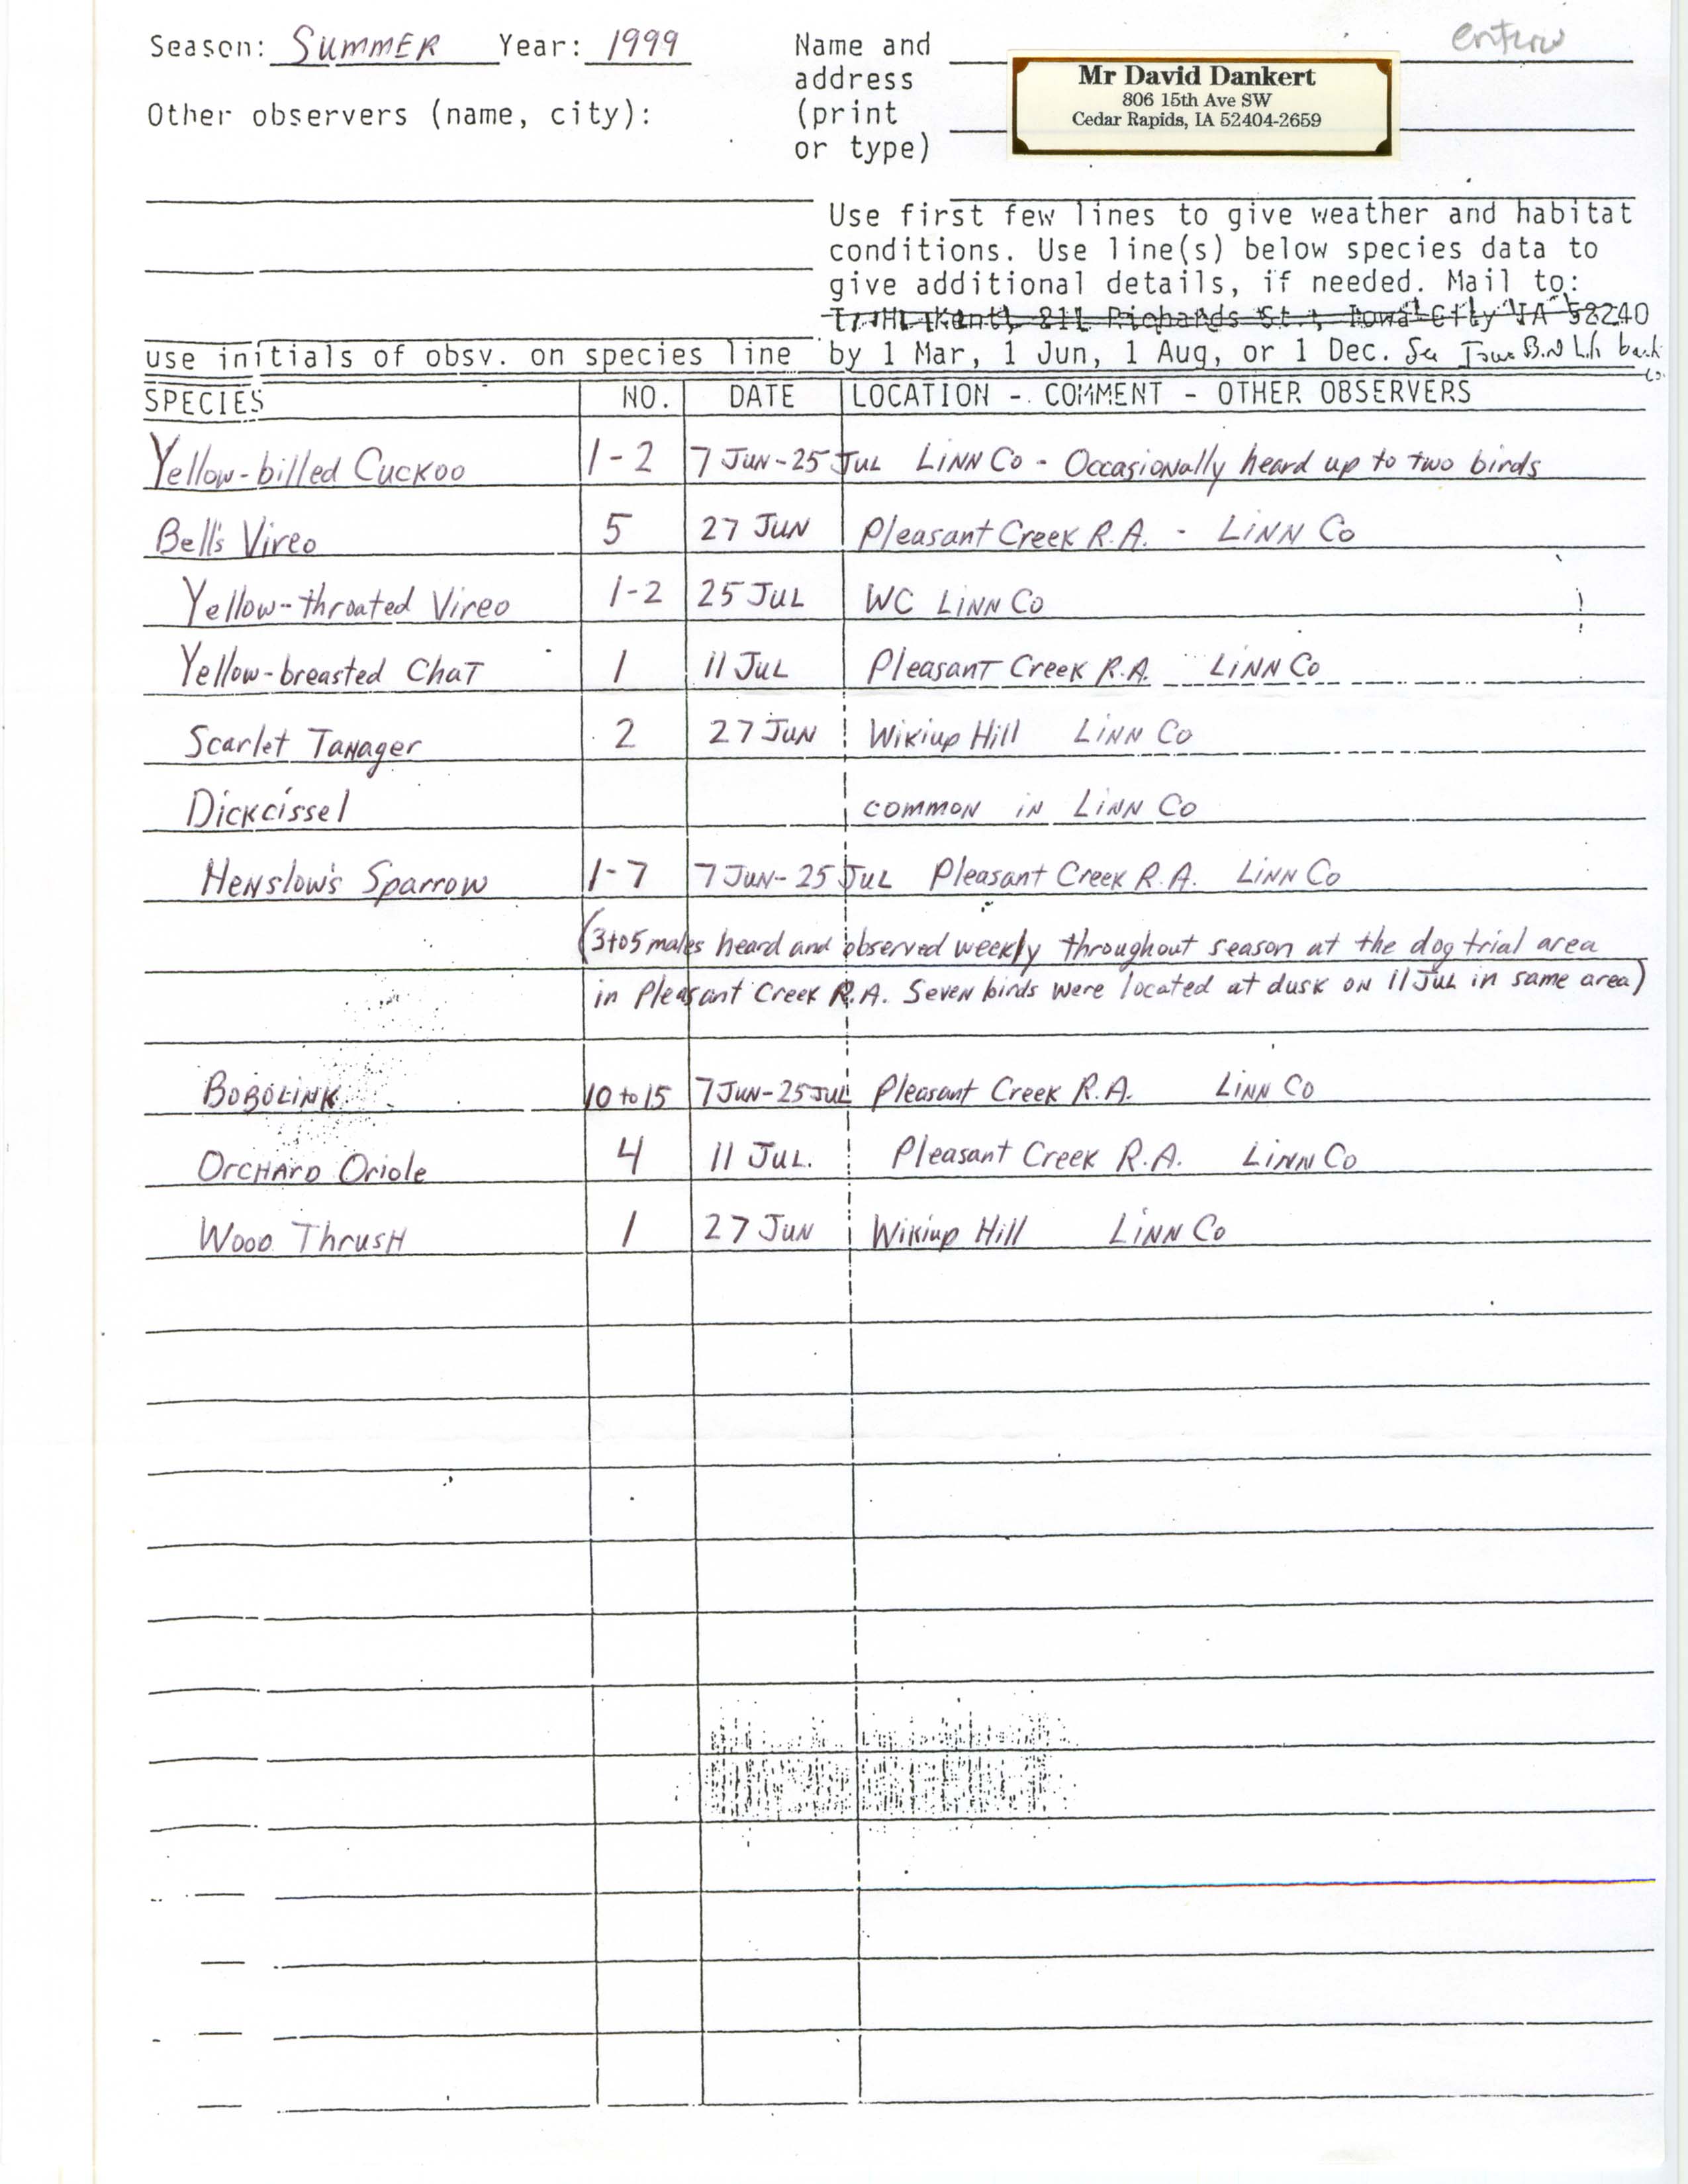 Field reports form for submitting seasonal observations of Iowa birds, Summer 1999, David Dankert